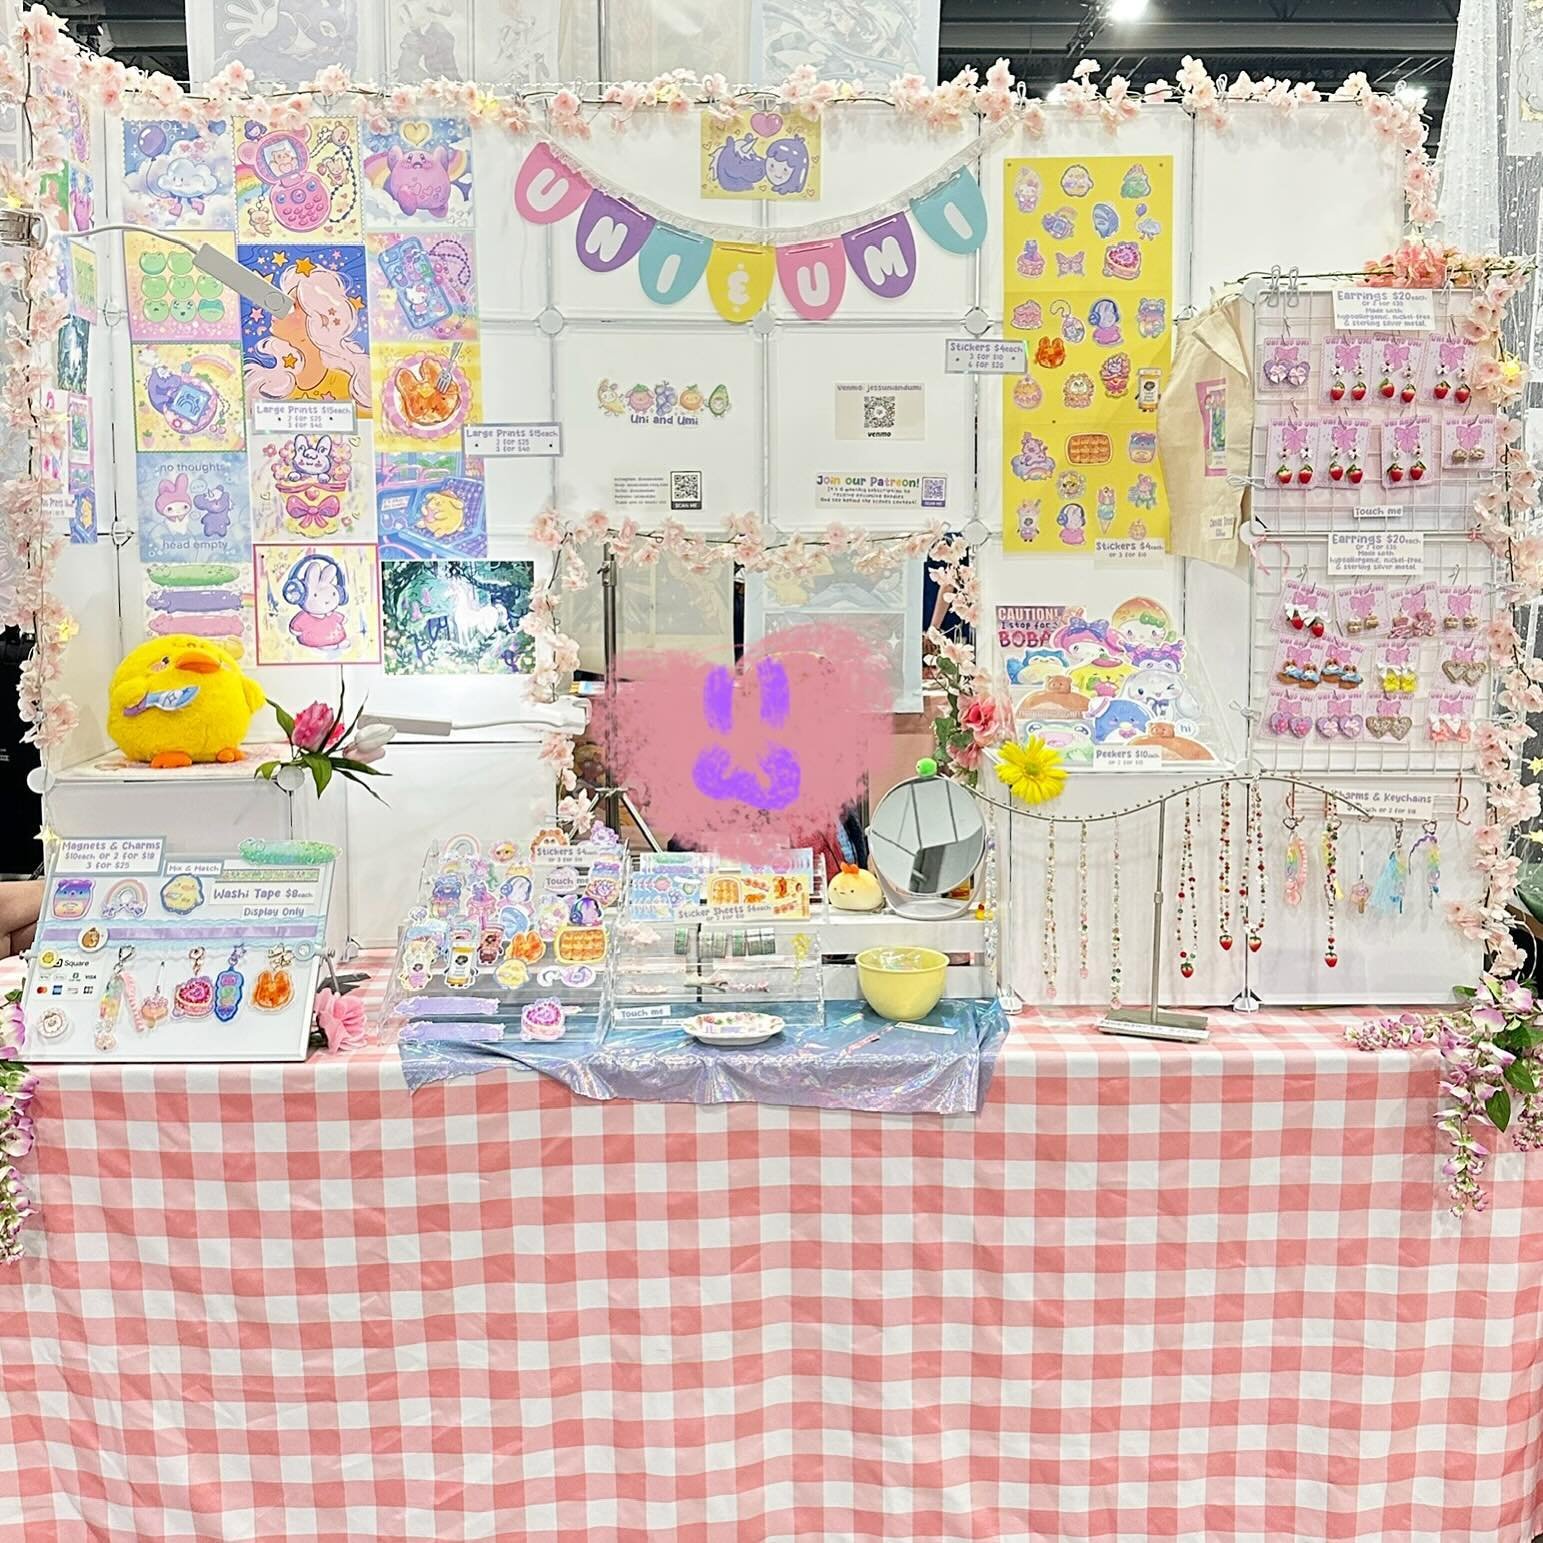 🤩MOTOR CITY @motcitycomiccon !! Thank you so much for the tremendous support! 🫶🏻💕 I&rsquo;ve sold out of a couple things and restocked some of it!😳😱 Today is the last day to get cute goodies in person!🩷 See ya there! ✨
.
.
.
🏷️
#kawaii #artis